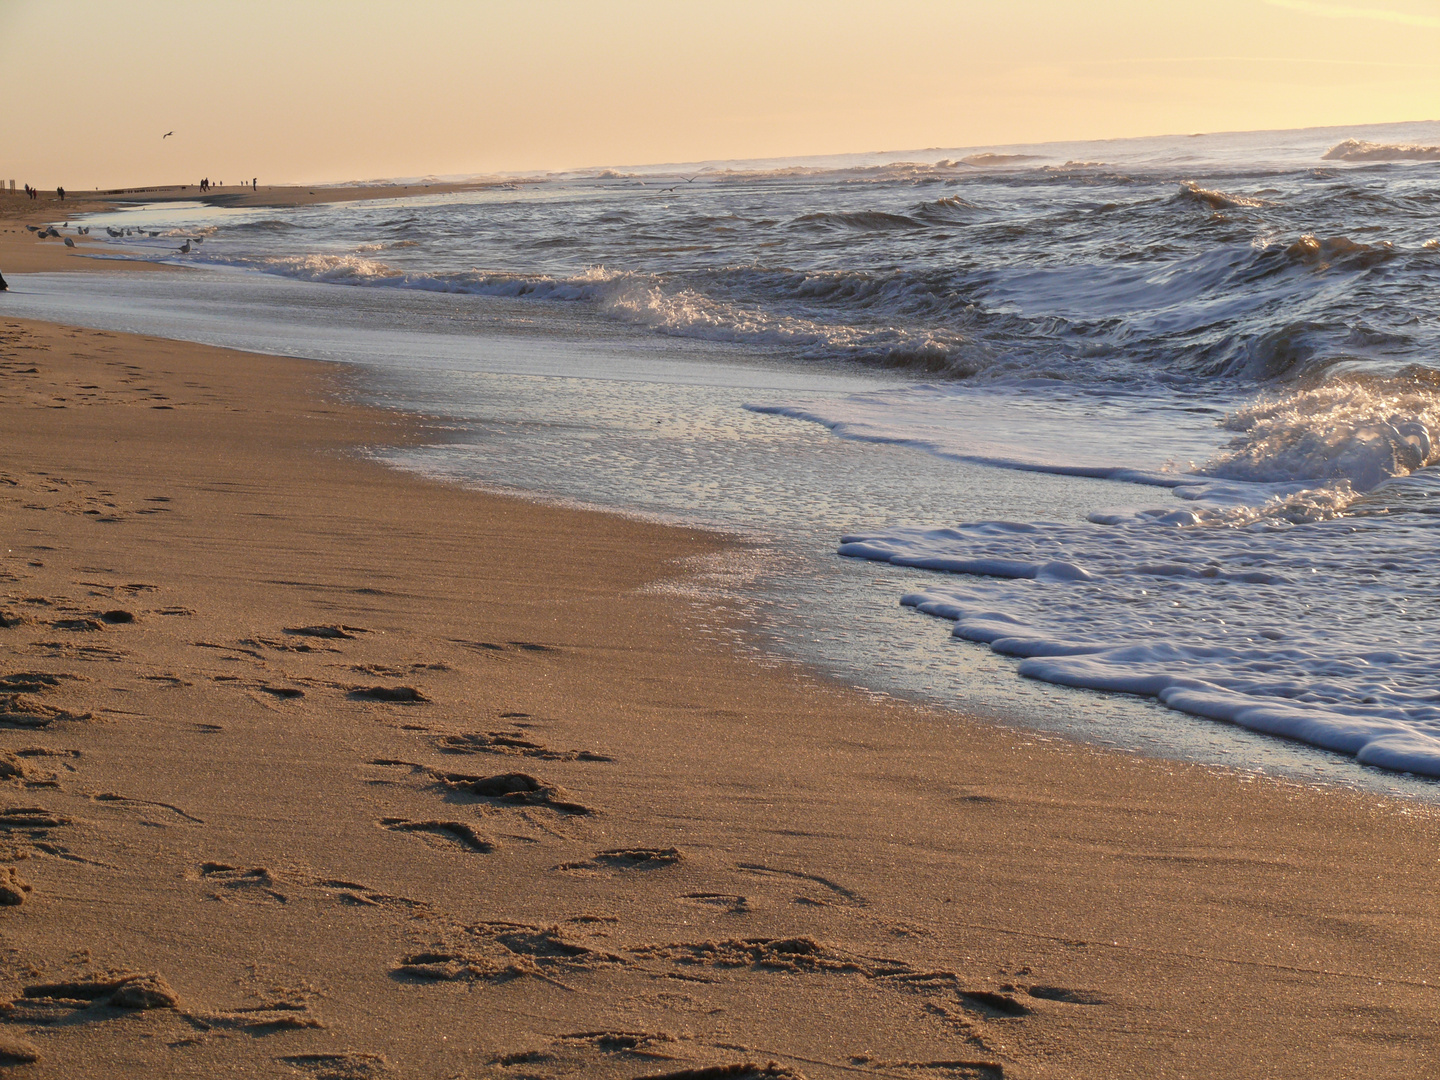 Leave nothing but footprints in the sand.